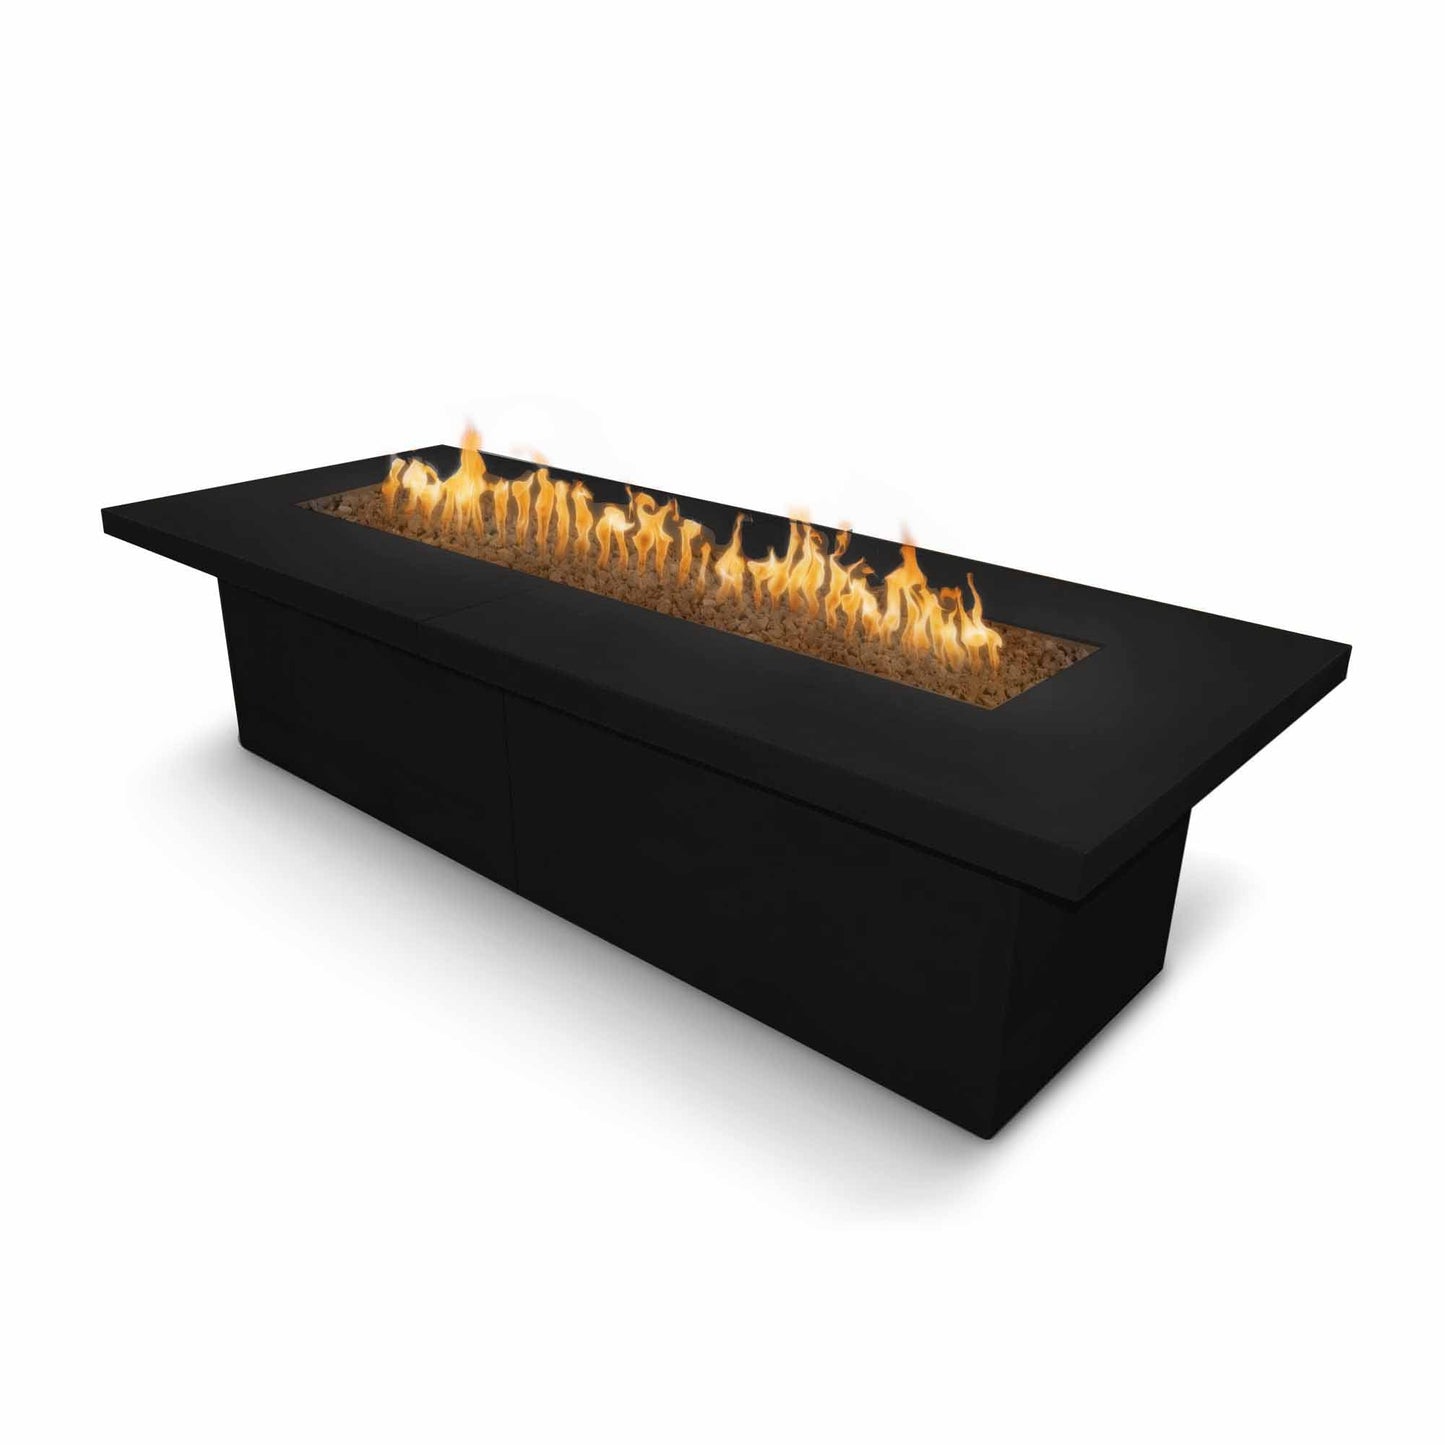 The Outdoor Plus Rectangular Newport 72" Stainless Steel Liquid Propane Fire Pit with Flame Sense with Spark Ignition